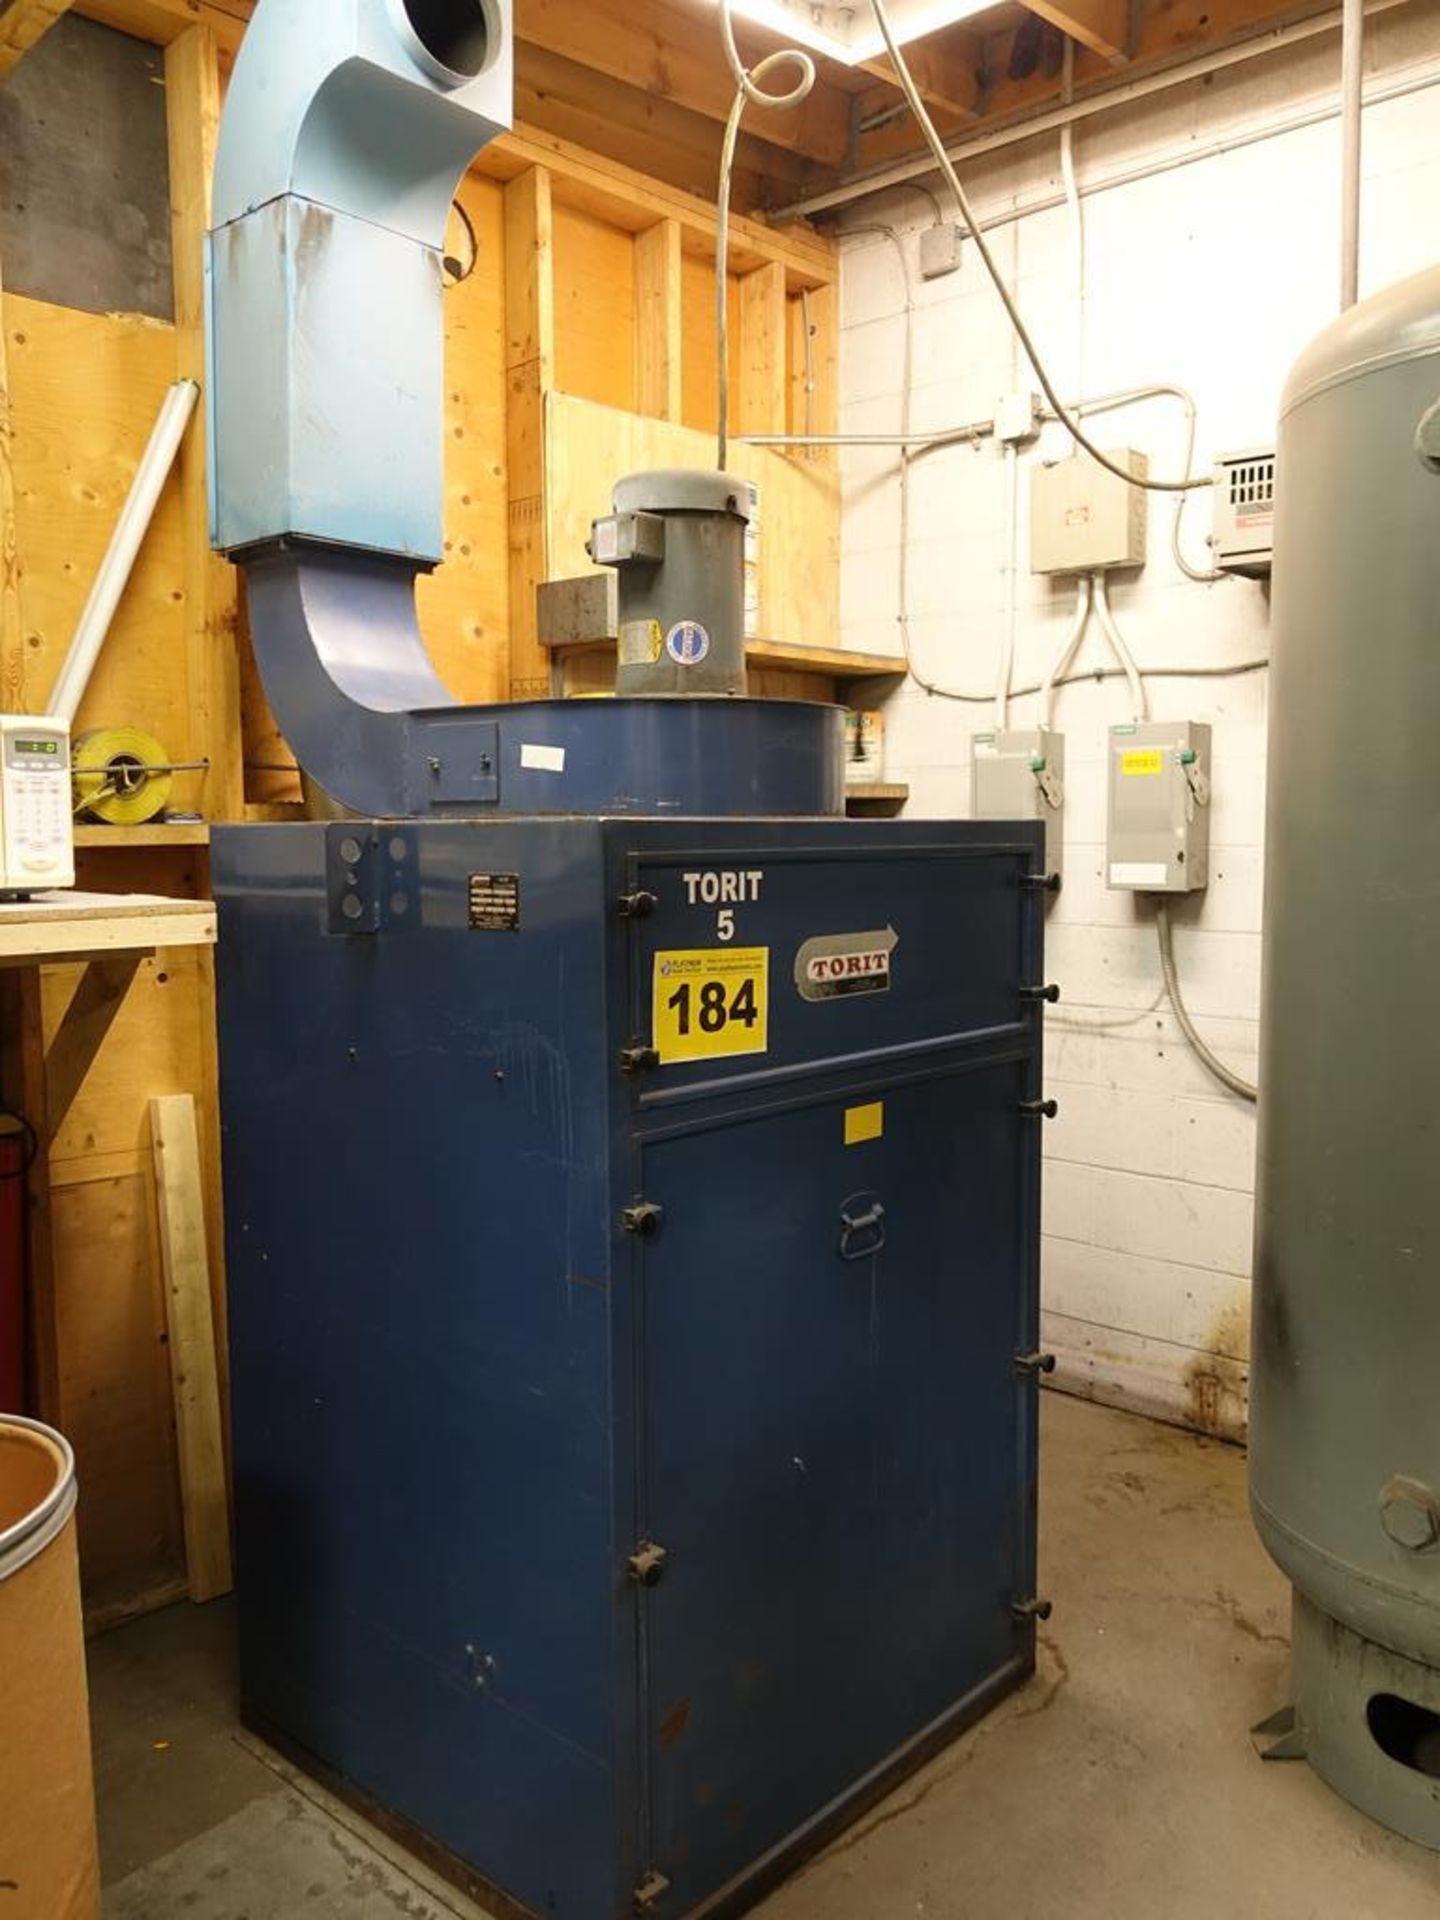 DONALDSON TORIT, 90-219-5, DUST COLLECTOR, S/N M-957 - Image 2 of 3